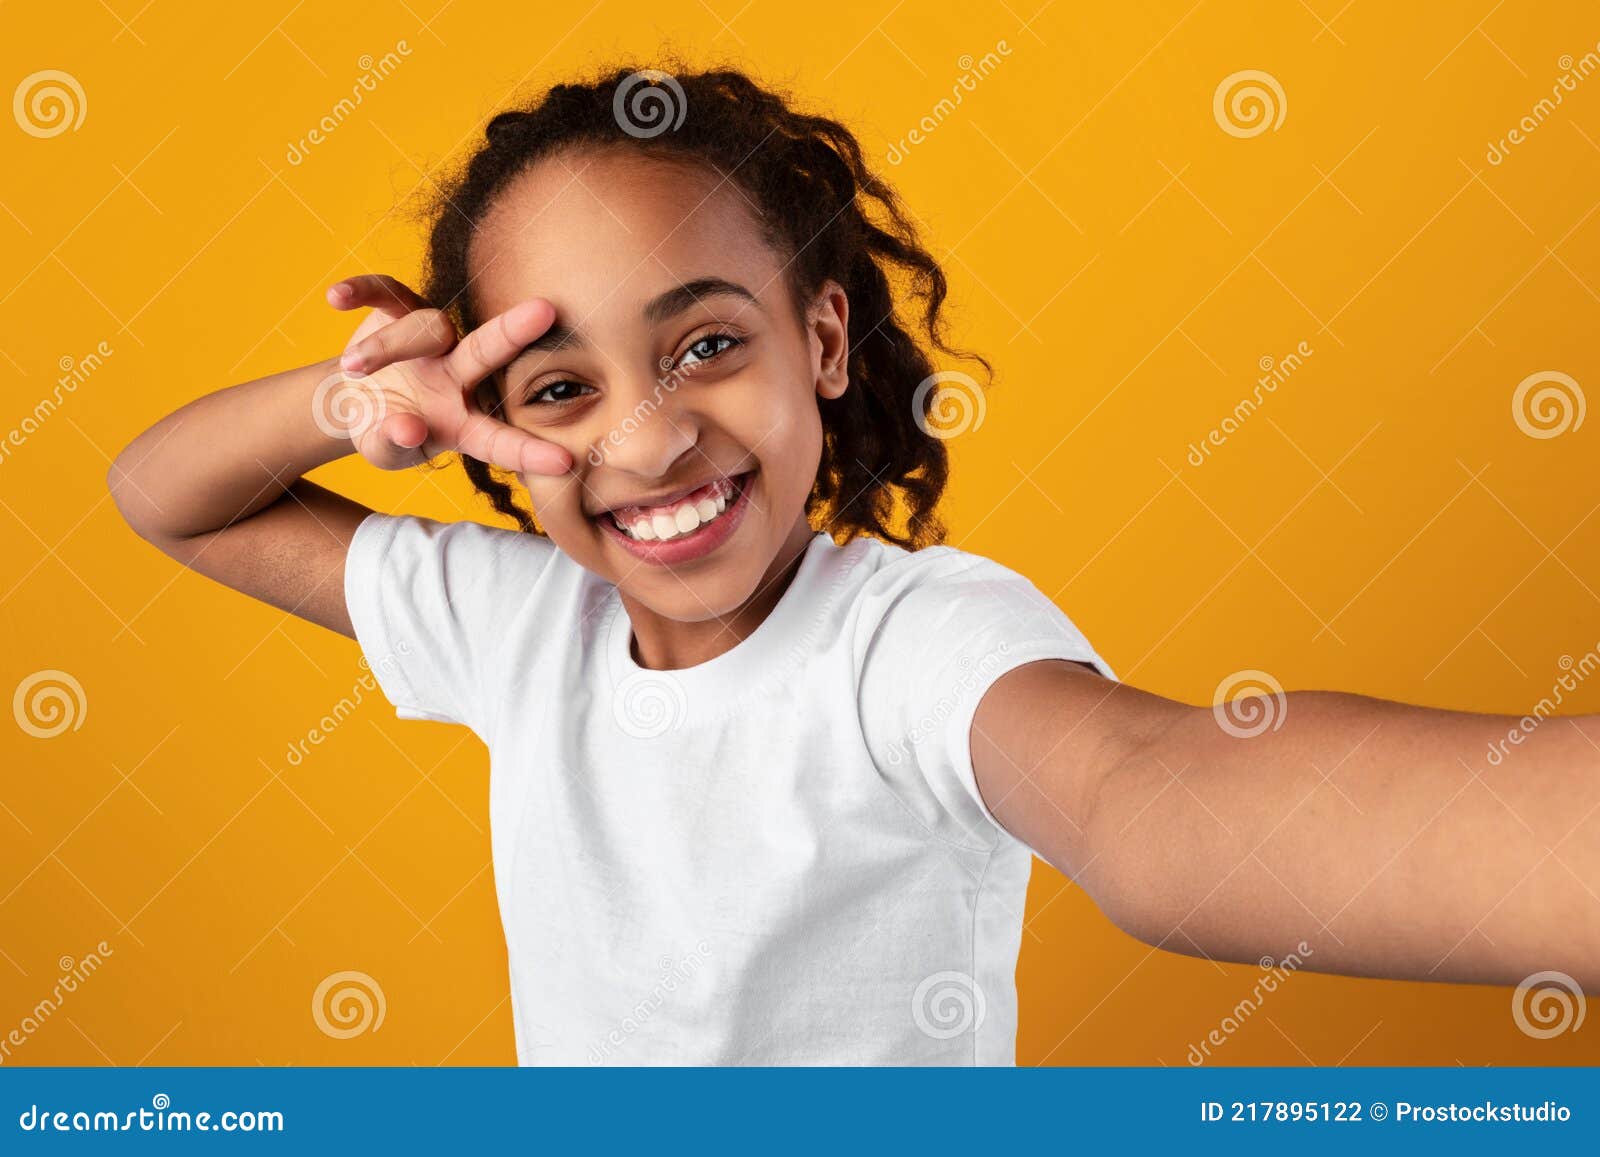 Black Girl Taking A Self Portrait Point Of View Stock Photo Image Of